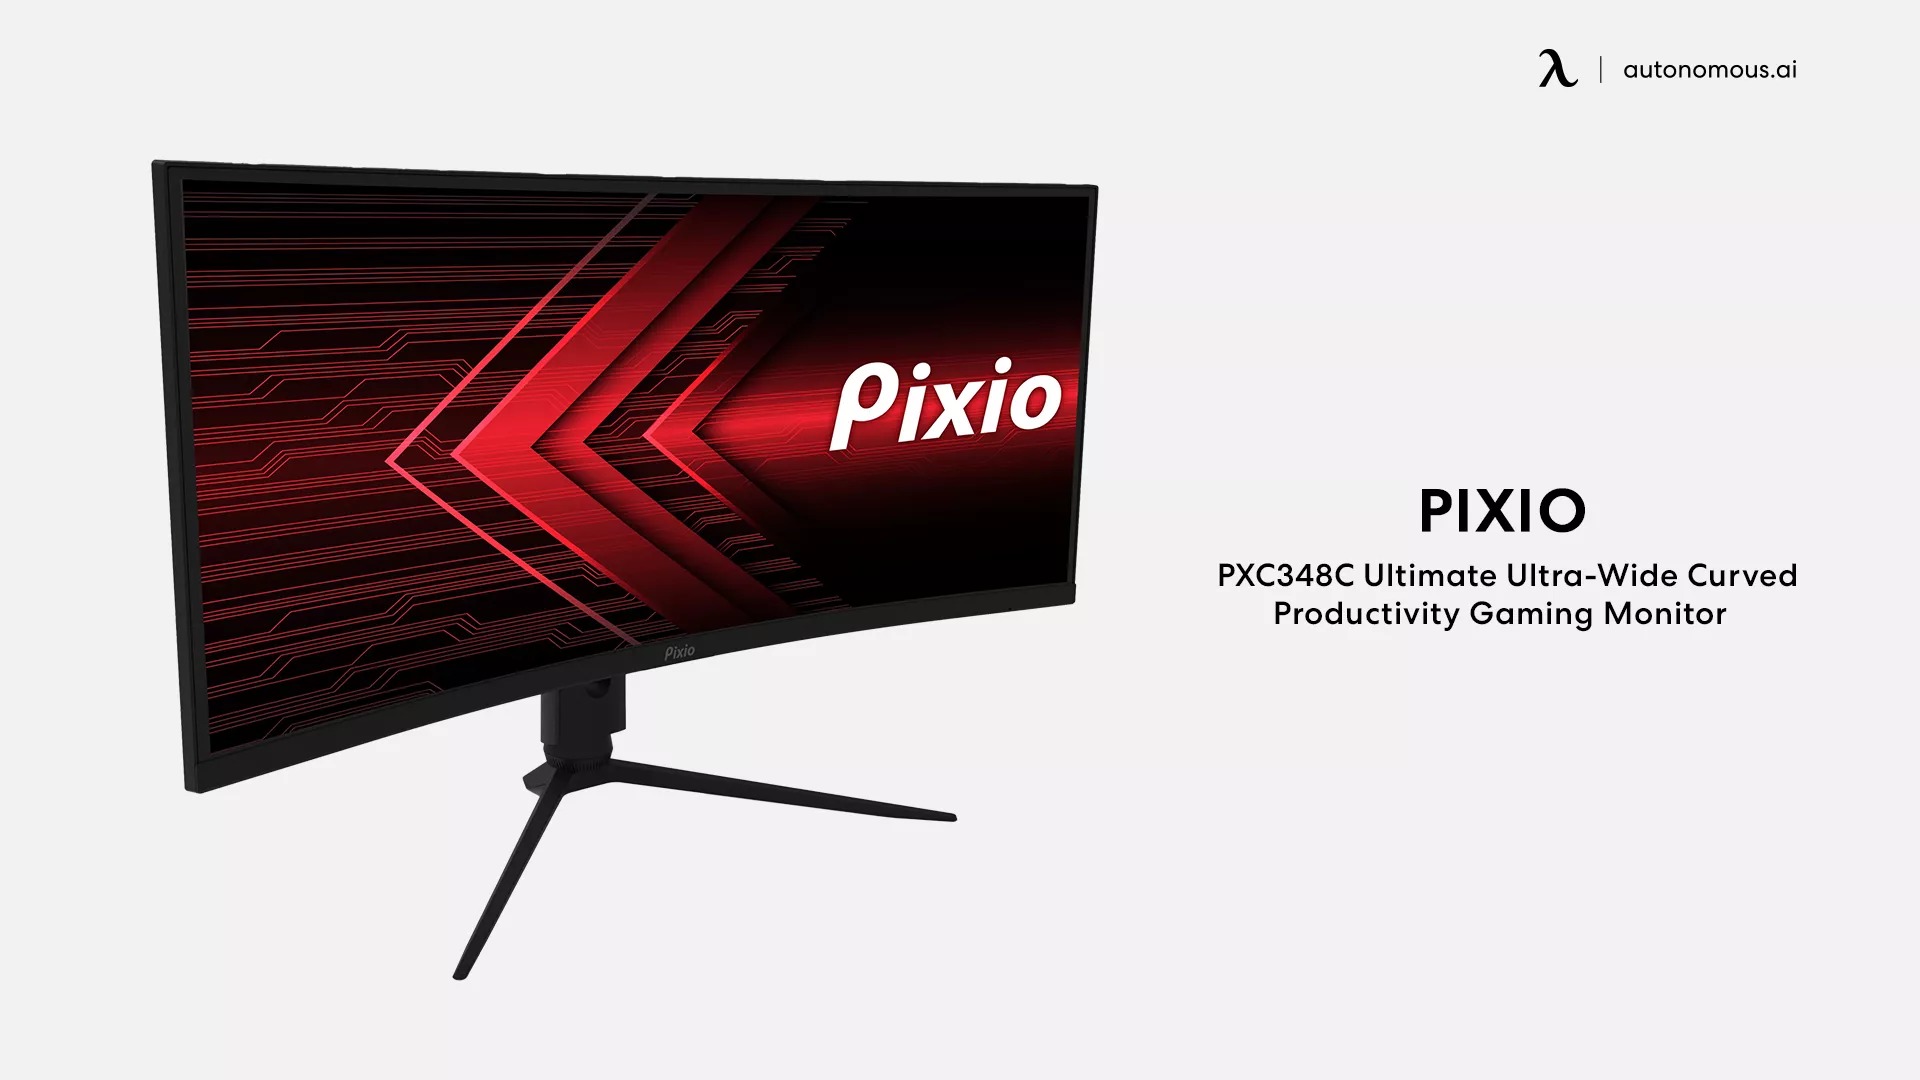 PXC348C Ultimate Ultra-Wide Curved Productivity Gaming Monitor